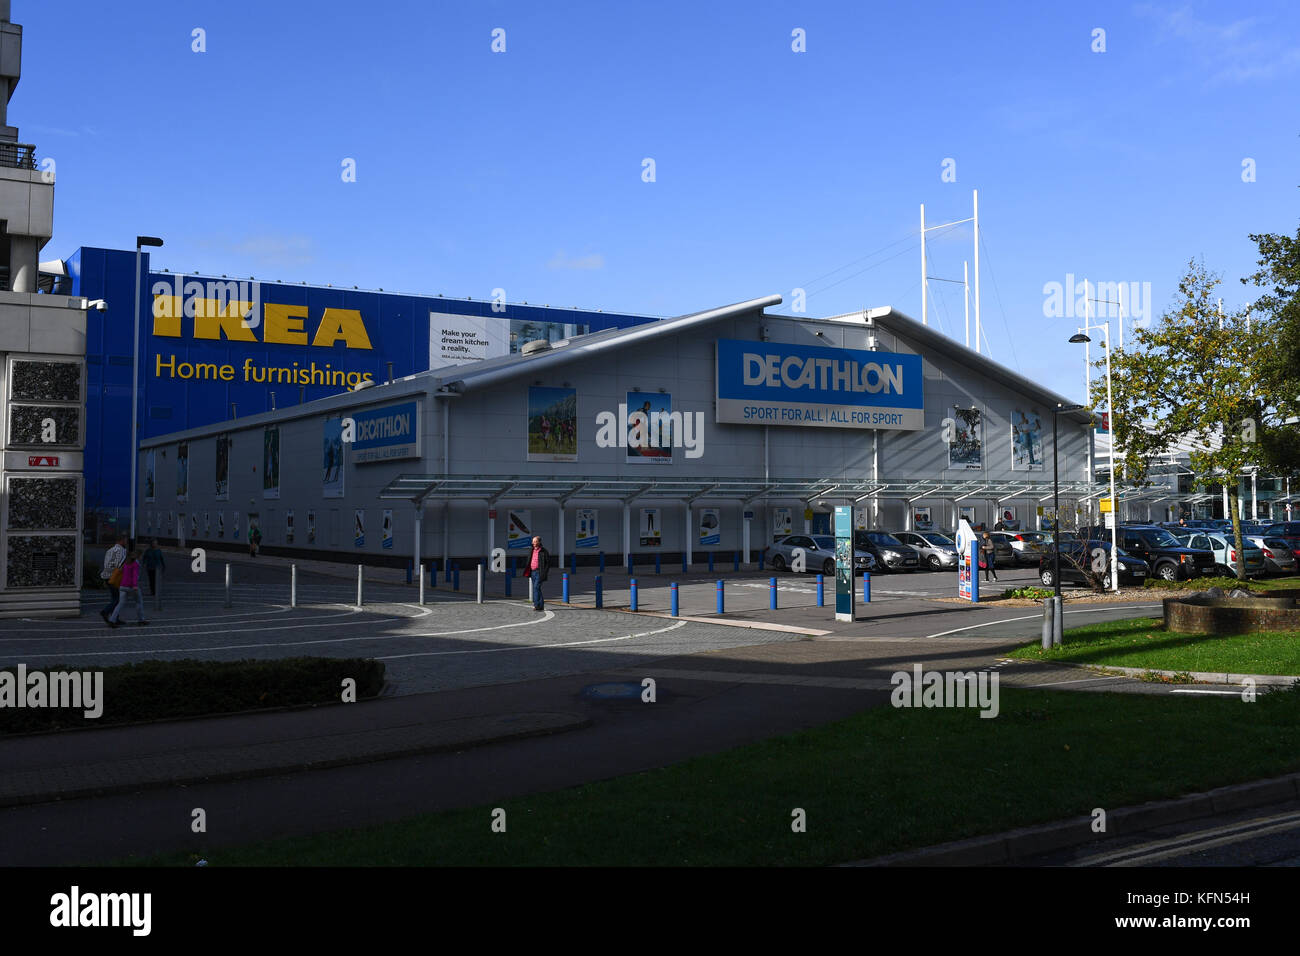 Decathlon and Ikea shops in Southampton 